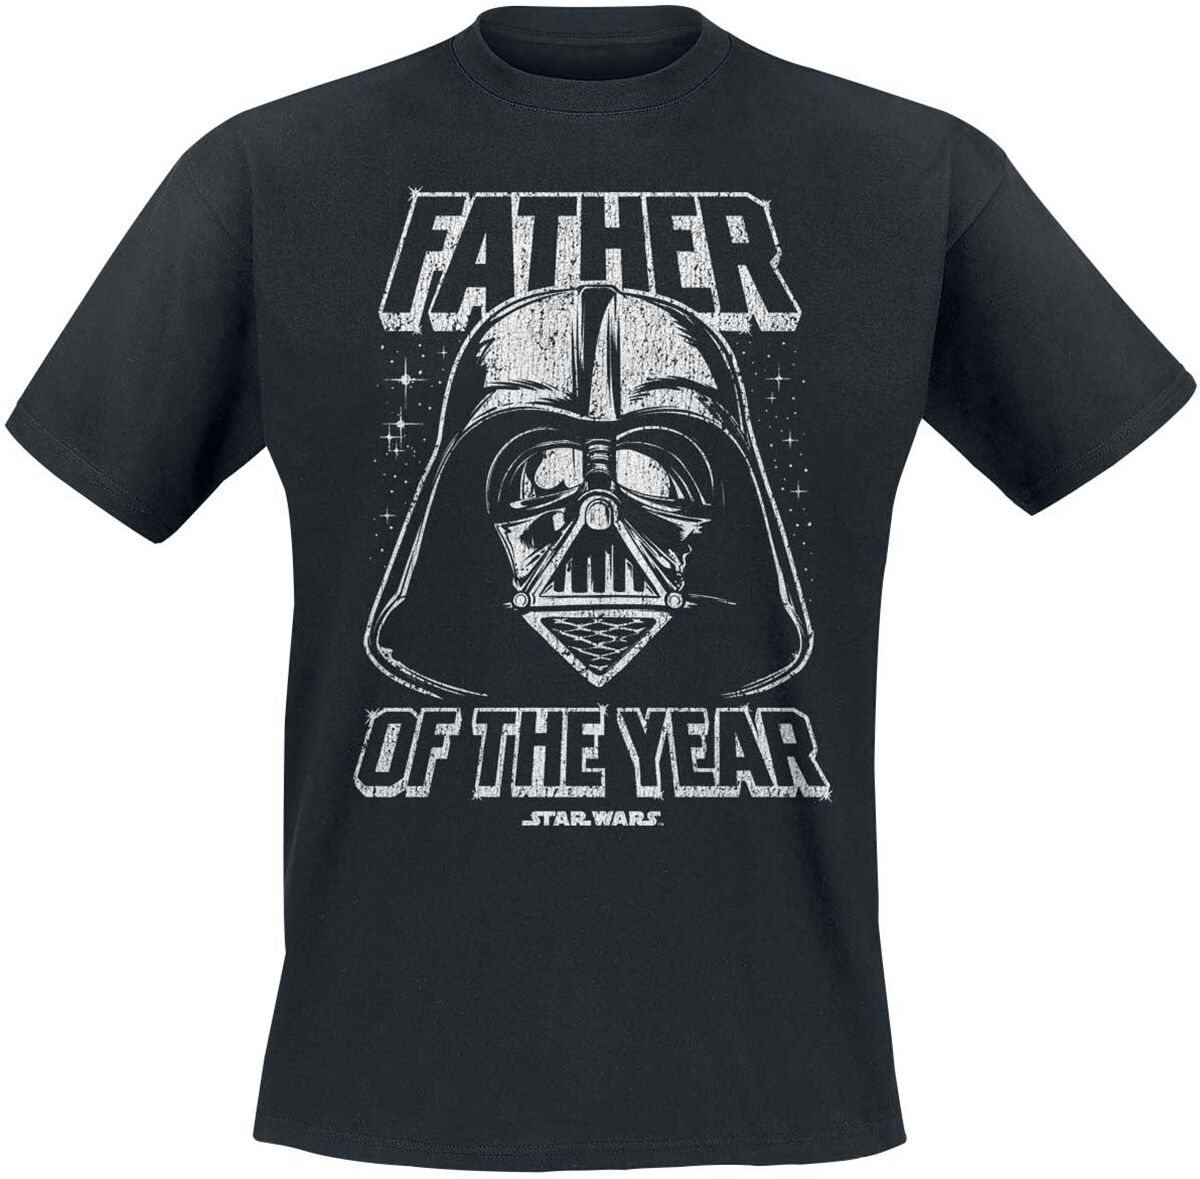 Star Wars Darth Vader - Father Of The Year T-Shirt schwarz in M